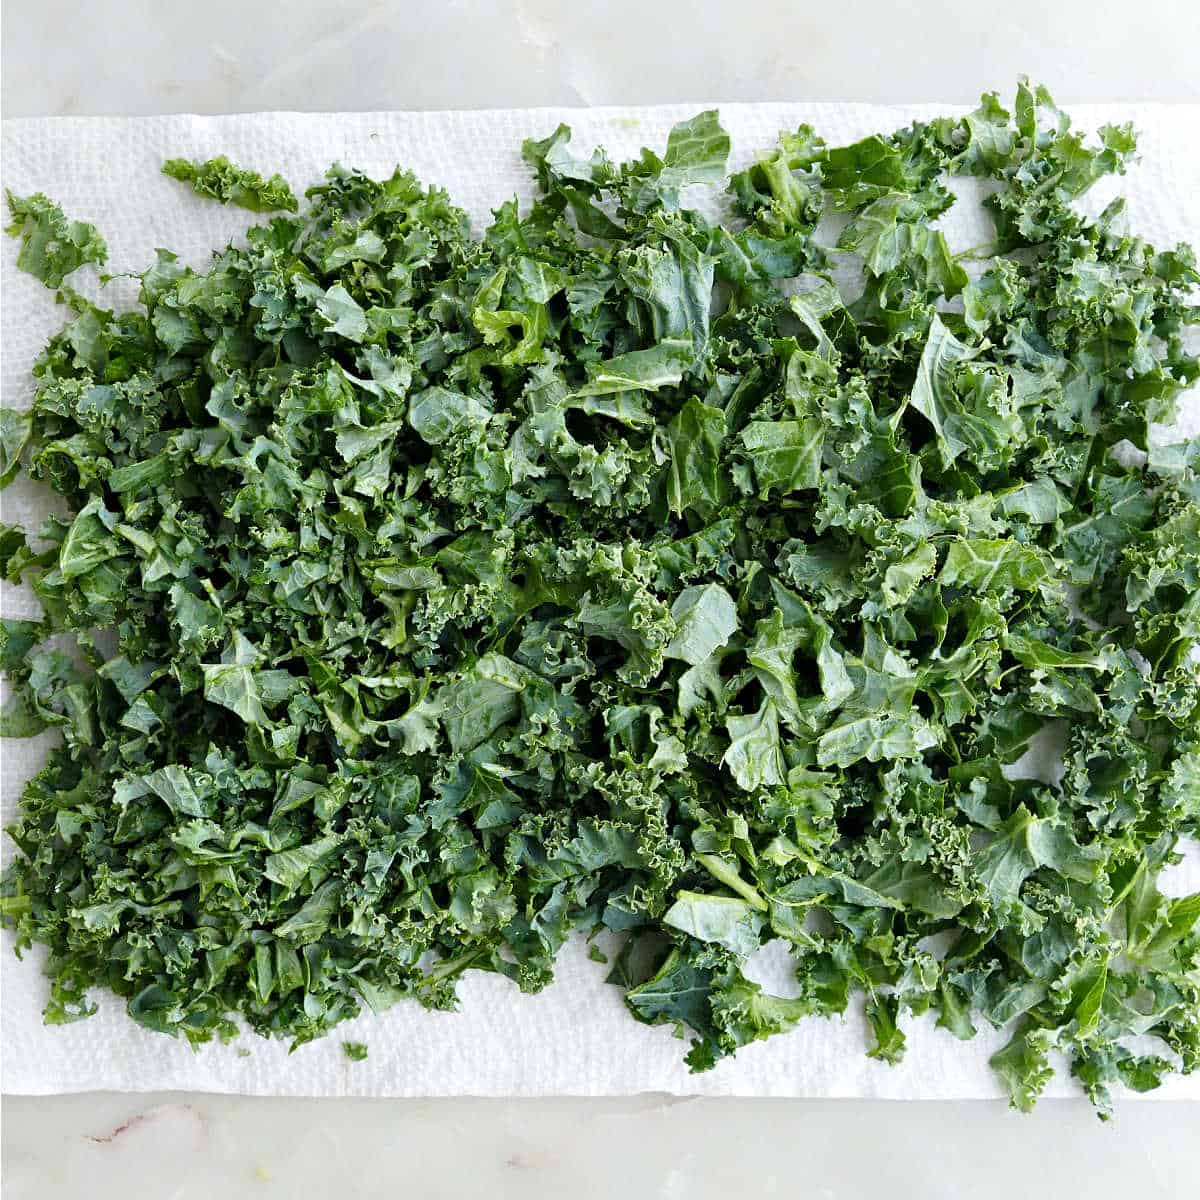 washed kale leaves drying on paper towels on a counter